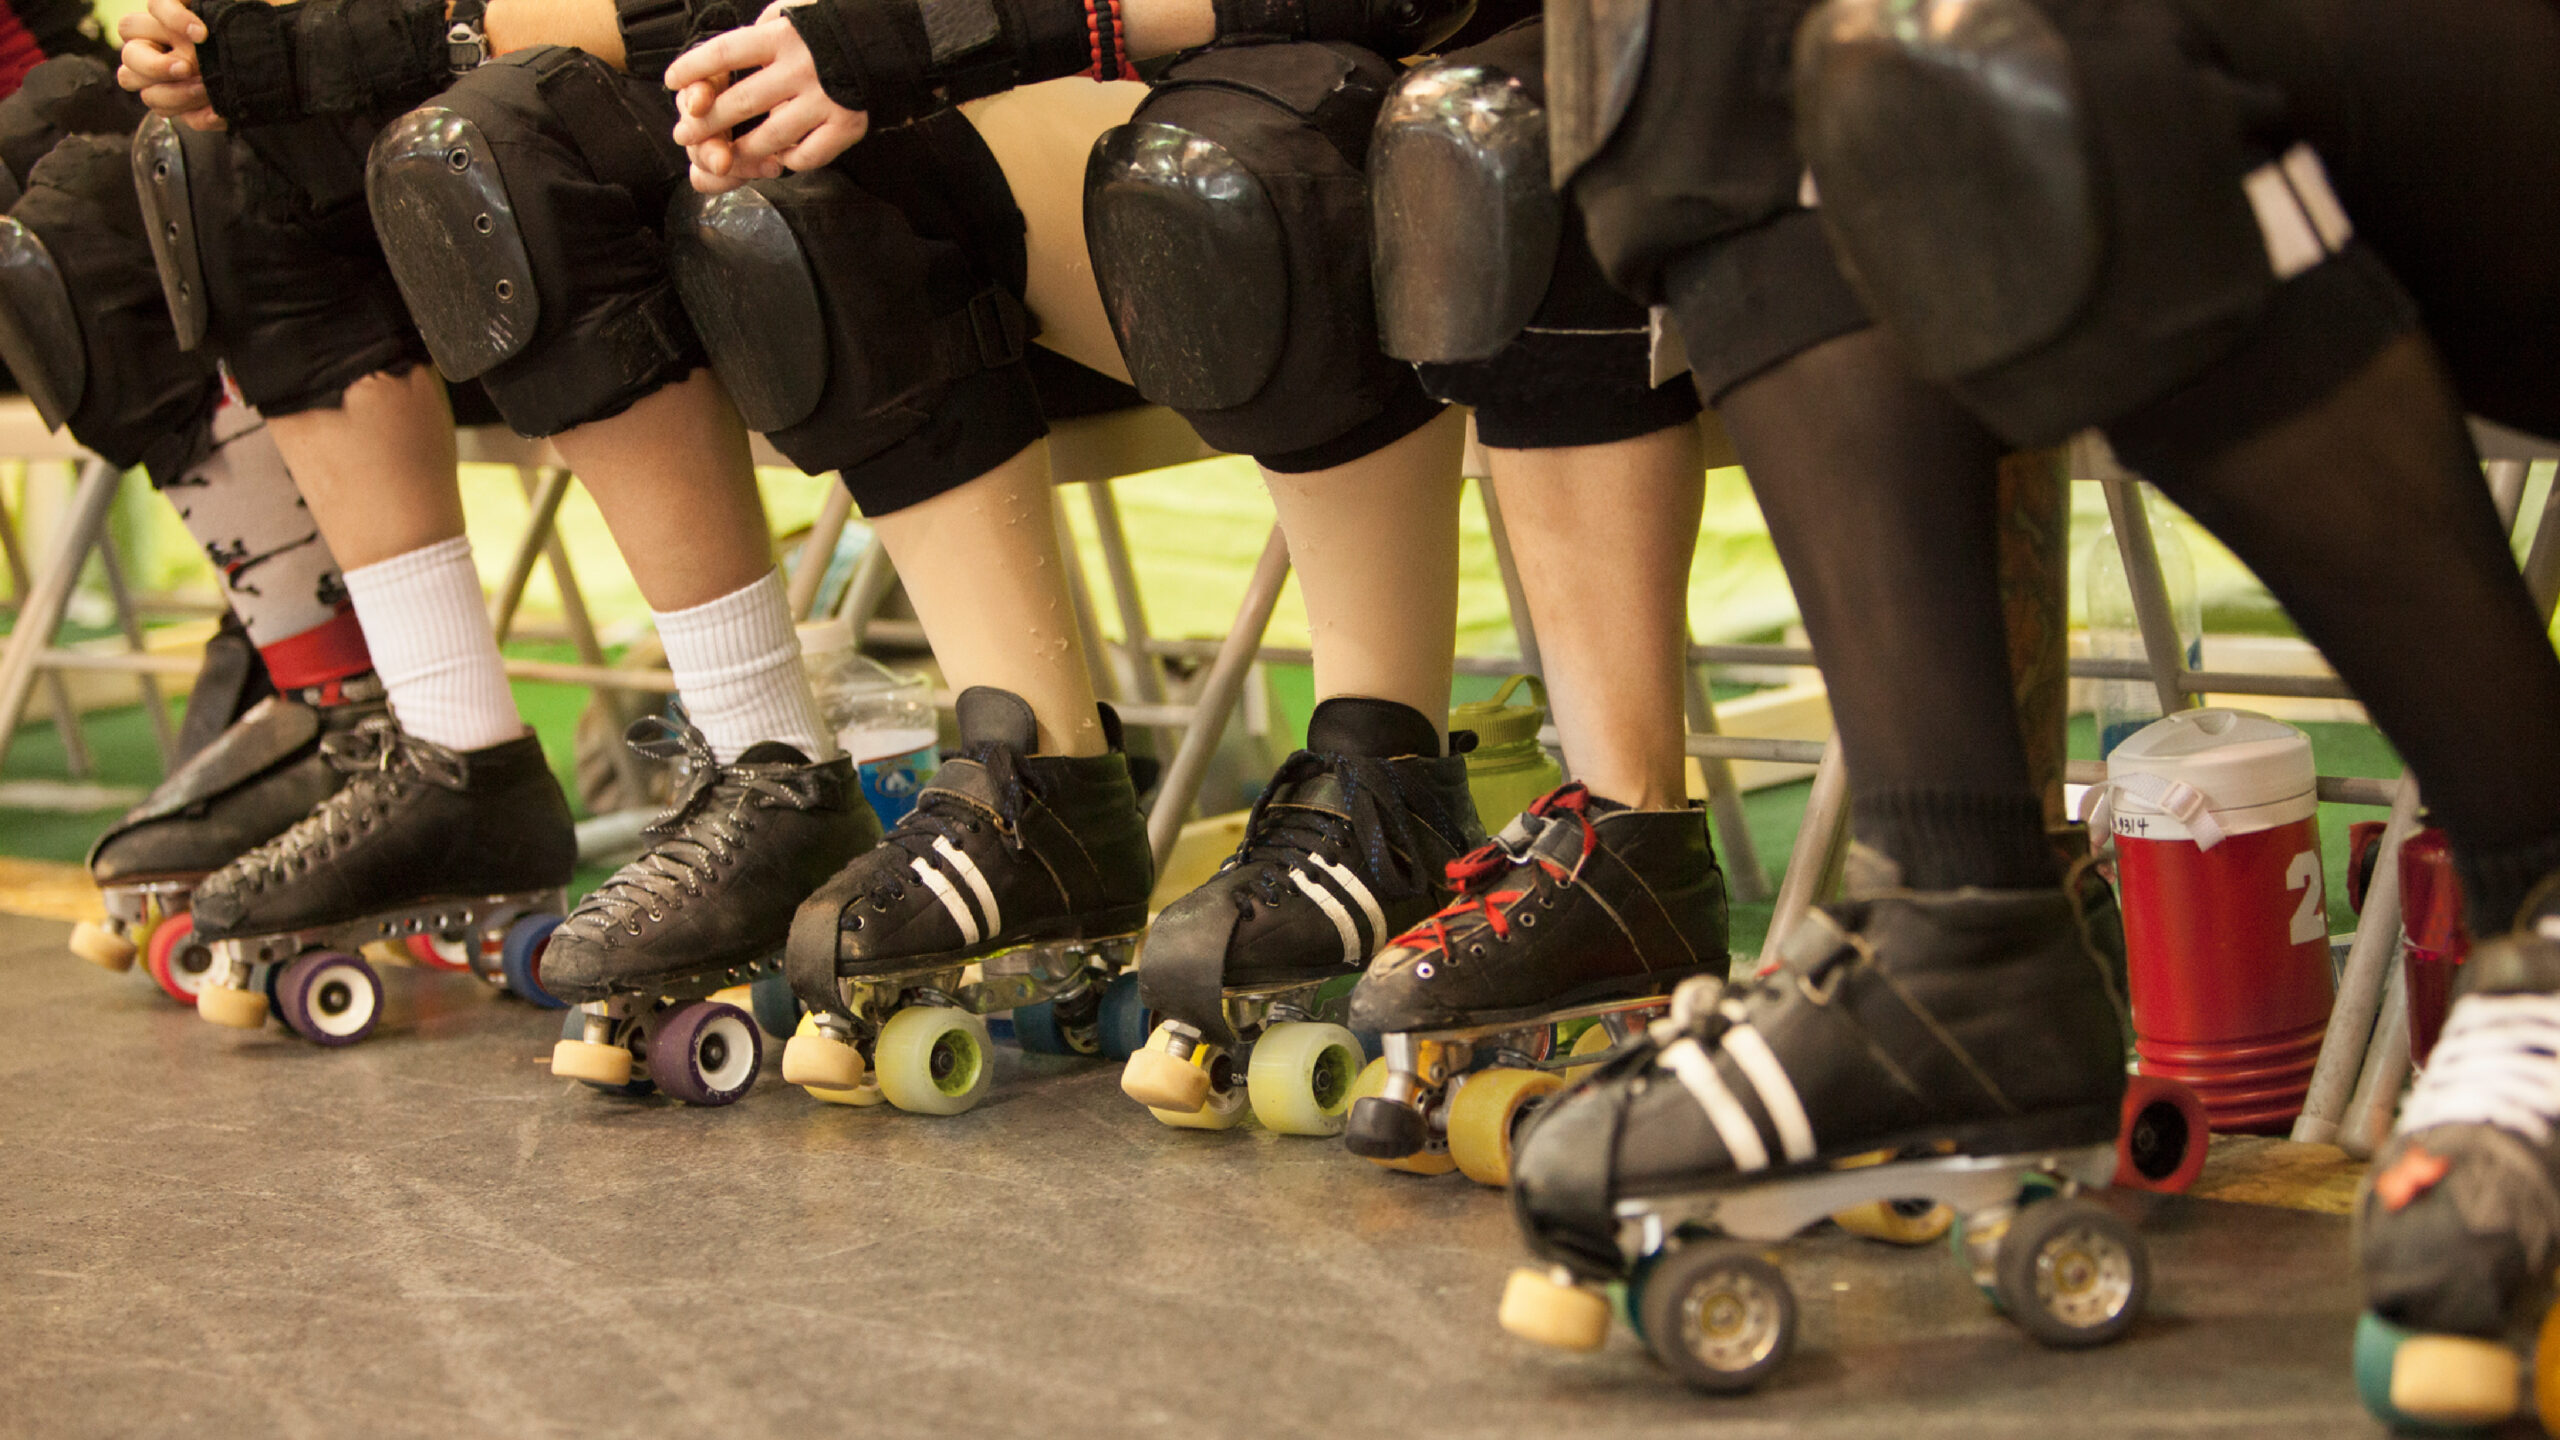 Photo of roller derby players knees, knee pads and in roller skates, seated in a row.